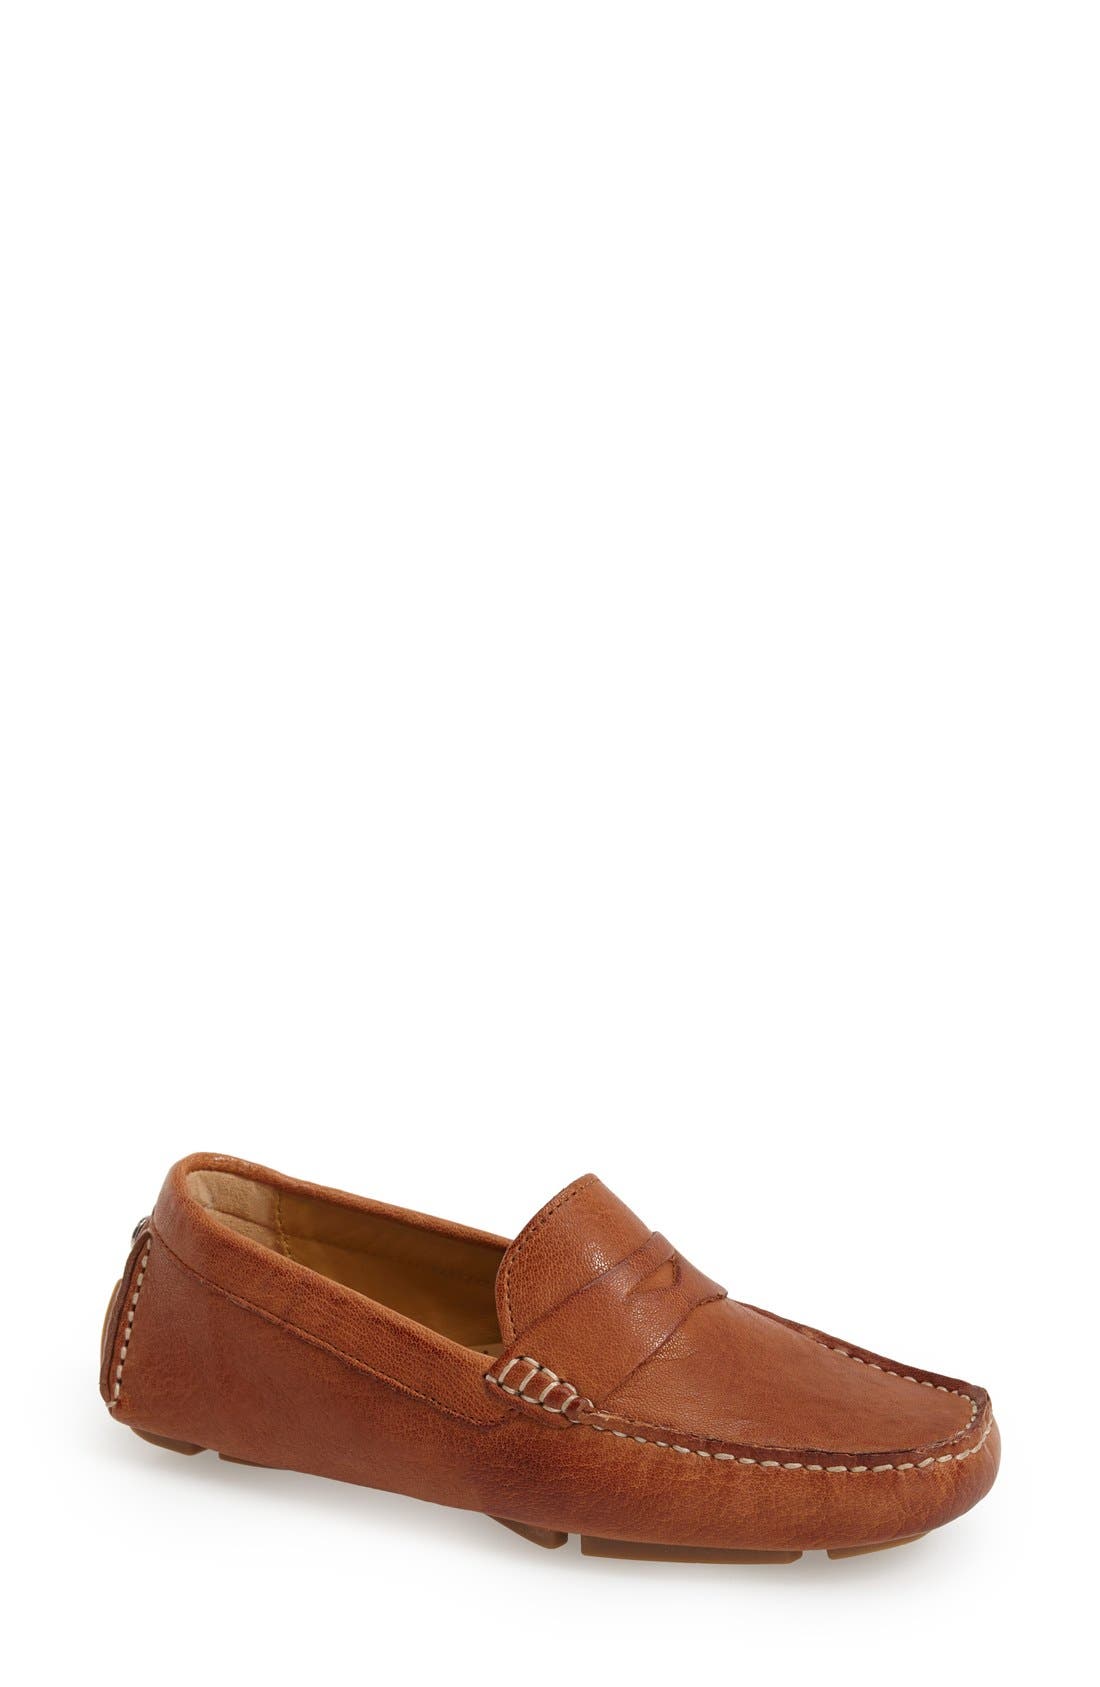 cole haan women's trillby driver penny loafer